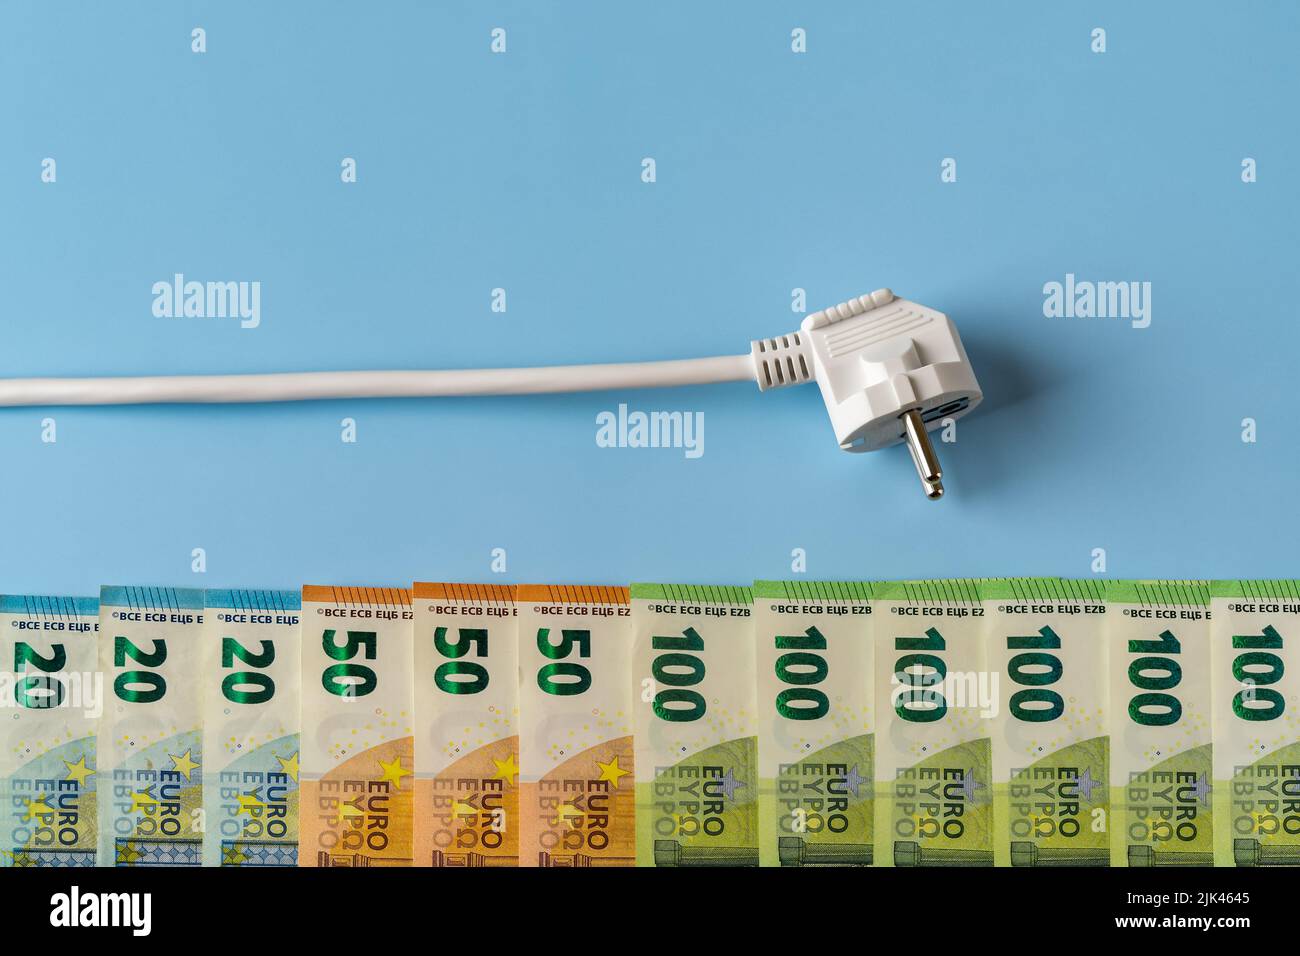 Power plug above row of euro money banknotes against blue background. Concept of rising energy bills and electricity price spike. High energy costs. Stock Photo